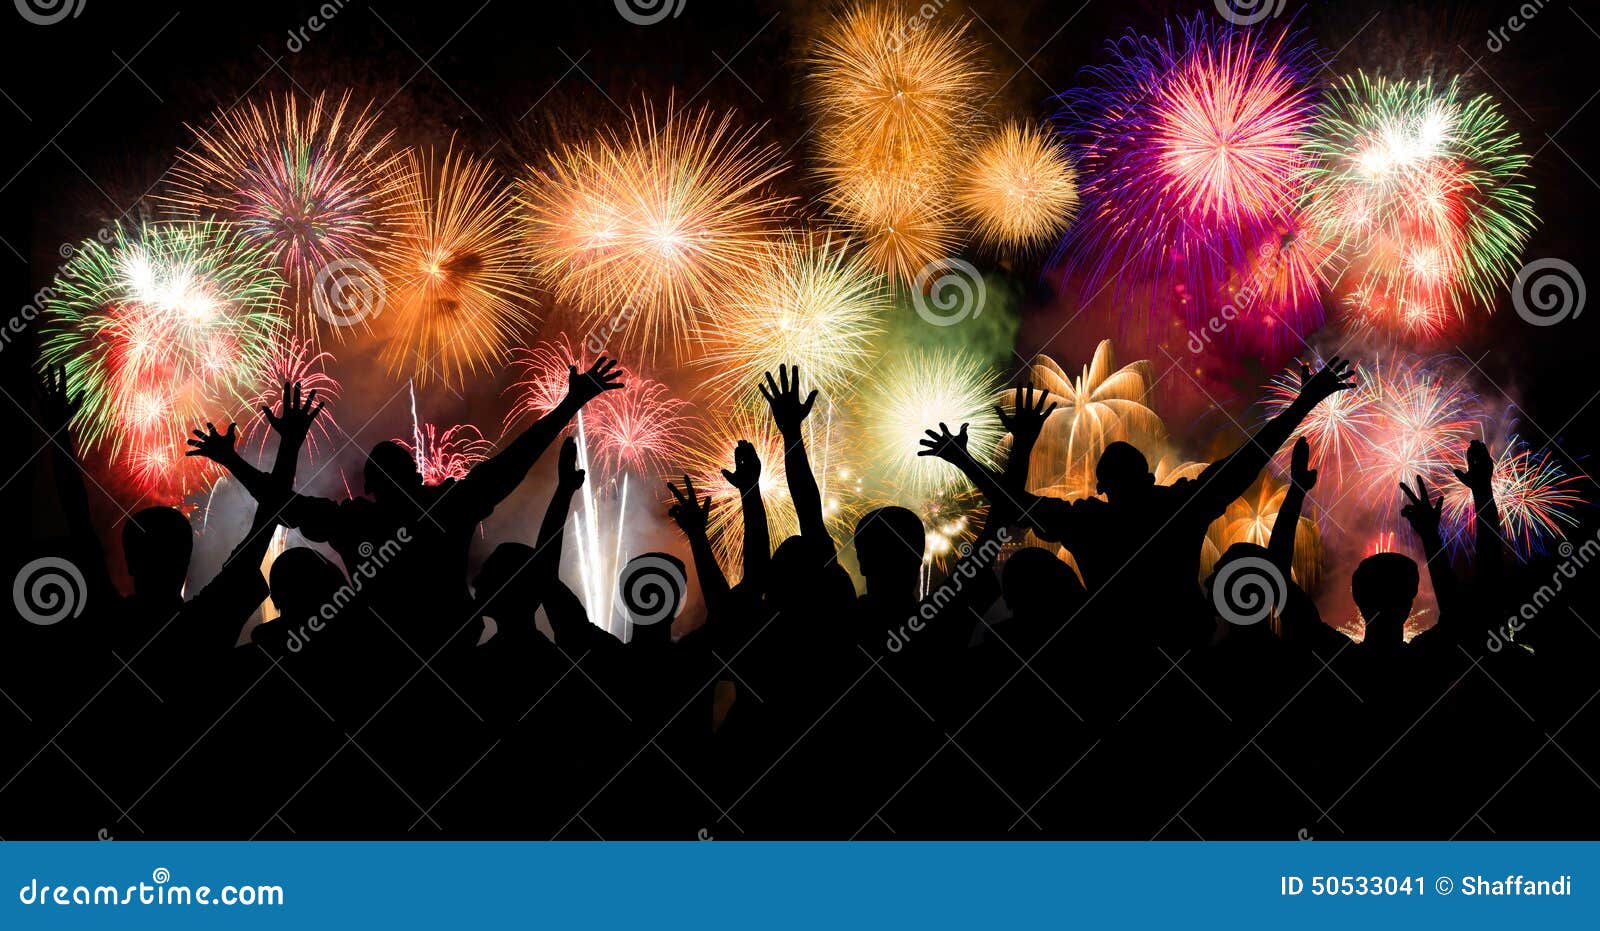 group of people enjoying spectacular fireworks show in a carnival or holiday